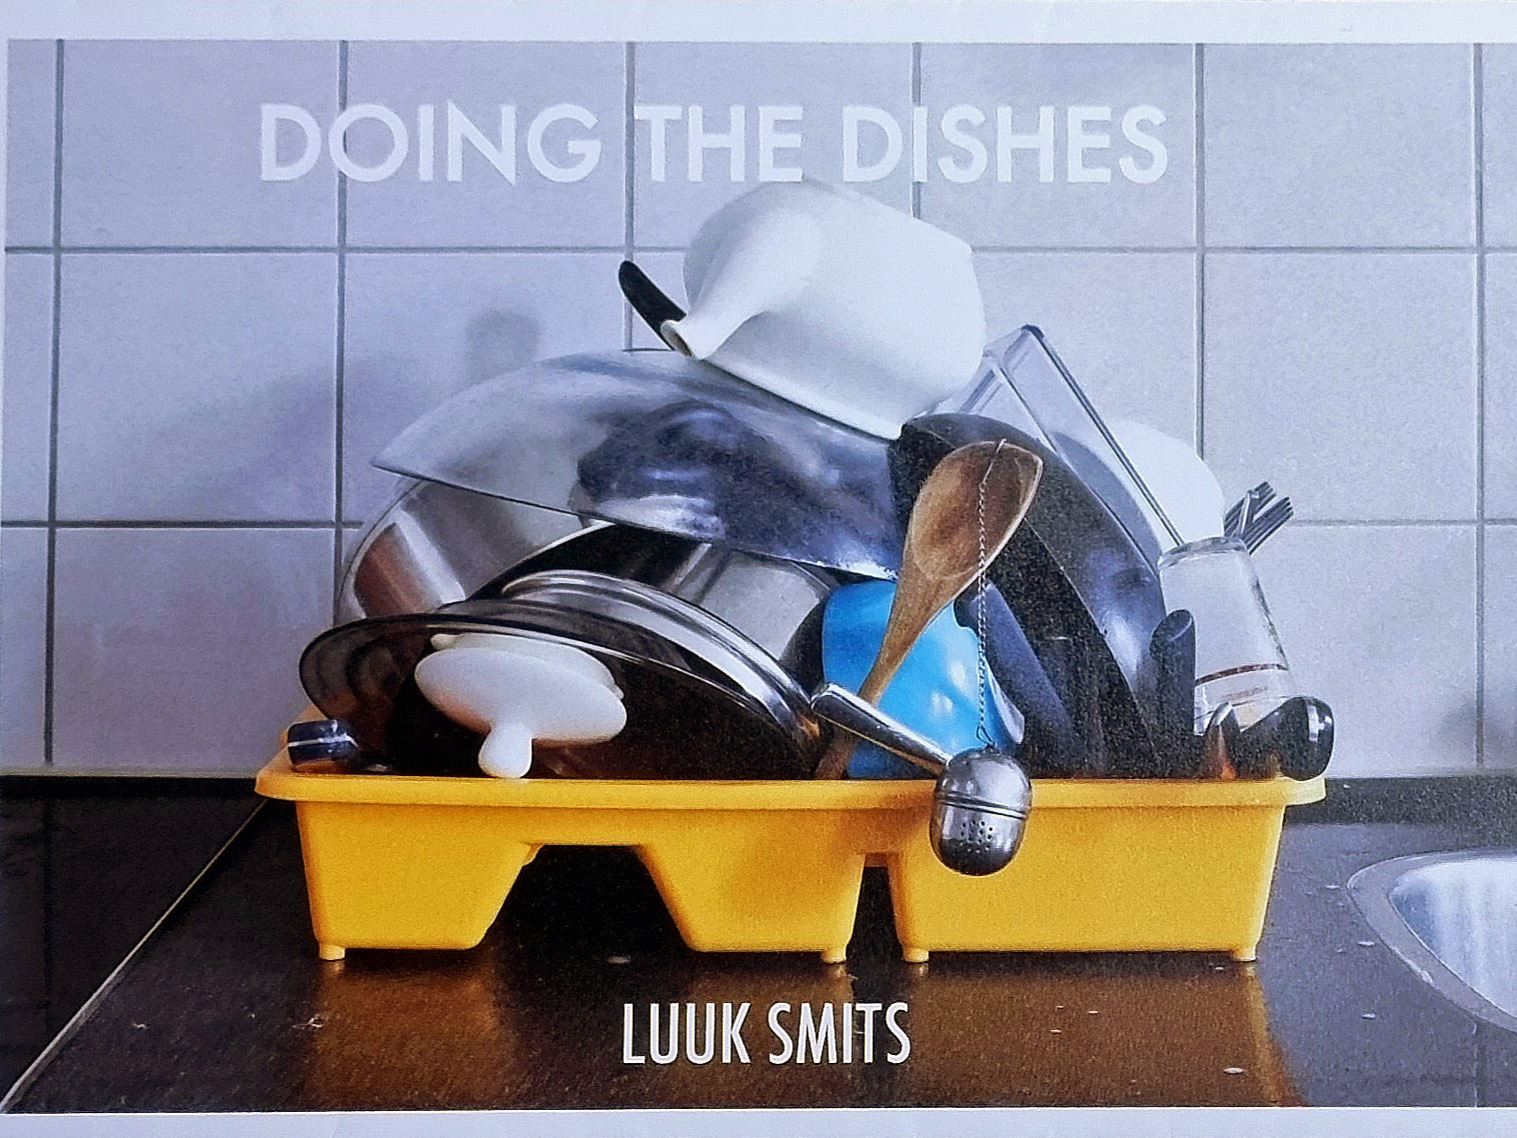 Doing The Dishes by Luuk Smits